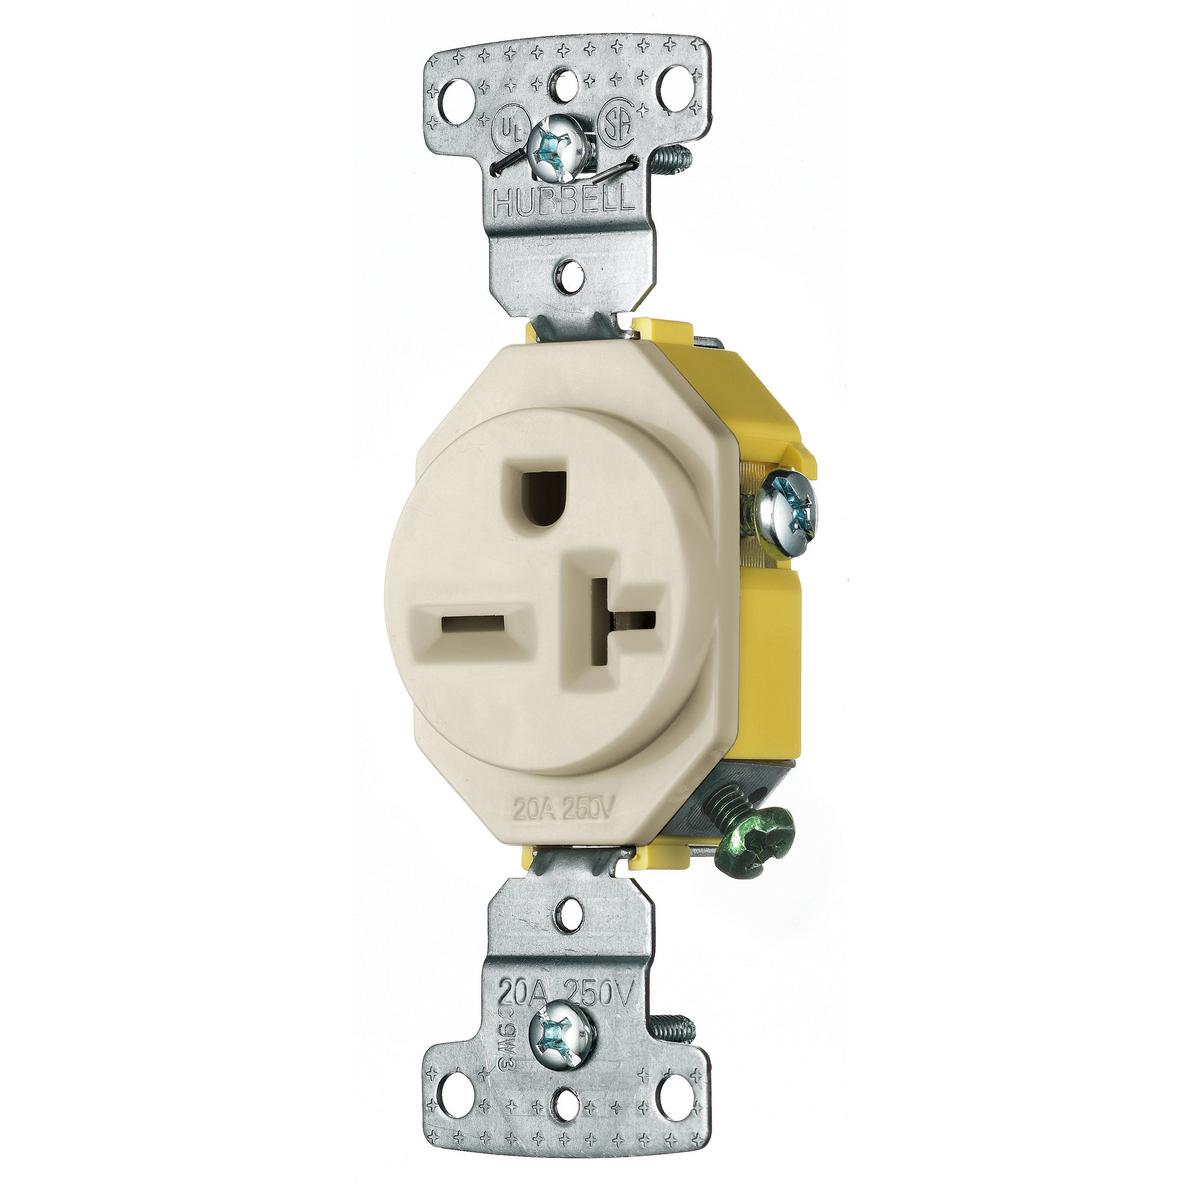 Hubbell RR205LA TradeSelect, Straight Blade Devices, Residential Grade, Receptacles, Single, 20A 250V, 2-Pole 3-Wire Grounding, 6-20R, Self Grounding, Light Almond  ; Smooth indented face appearance ; Multiple-drive Slot/Phillips/Robertson head screws ; Tough thermoplast